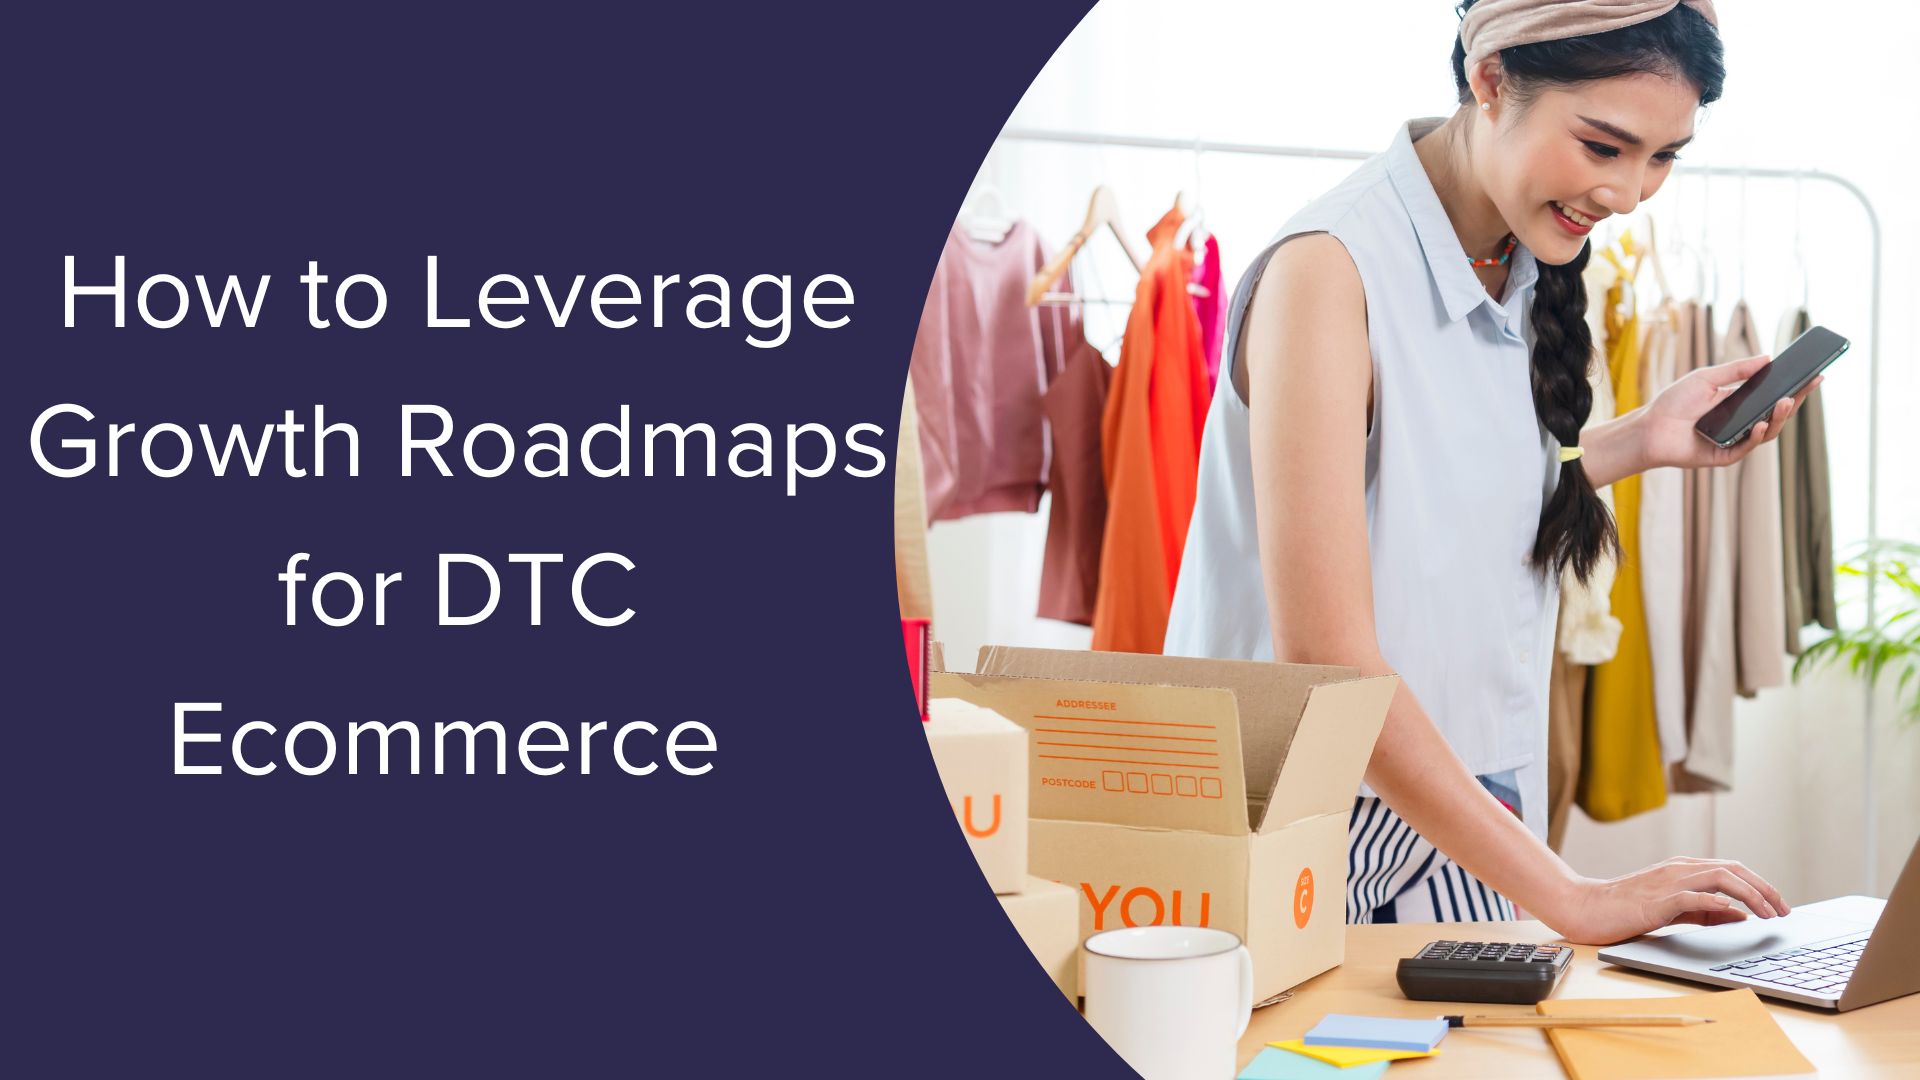 How to Leverage Growth Roadmaps for DTC Ecommerce